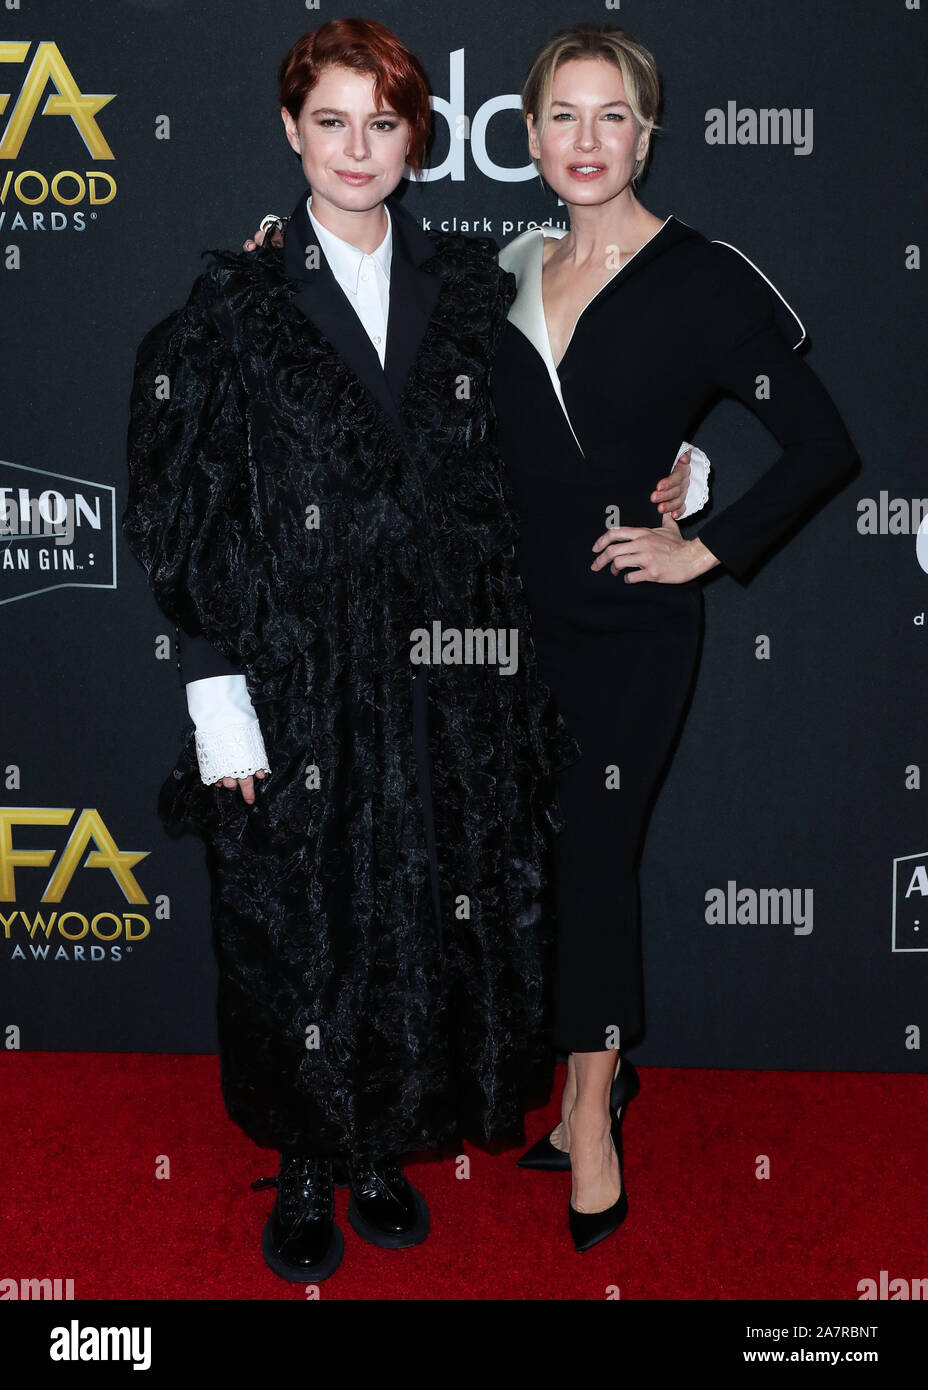 Beverly Hills, United States. 03rd Nov, 2019.Singer Jessie Buckley and actress Renee Zellweger arrive at the 23rd Annual Hollywood Film Awards held at The Beverly Hilton Hotel on November 3, 2019 in Beverly Hills, Los Angeles, California, United States. (Photo by Xavier Collin/Image Press Agency) Stock Photo